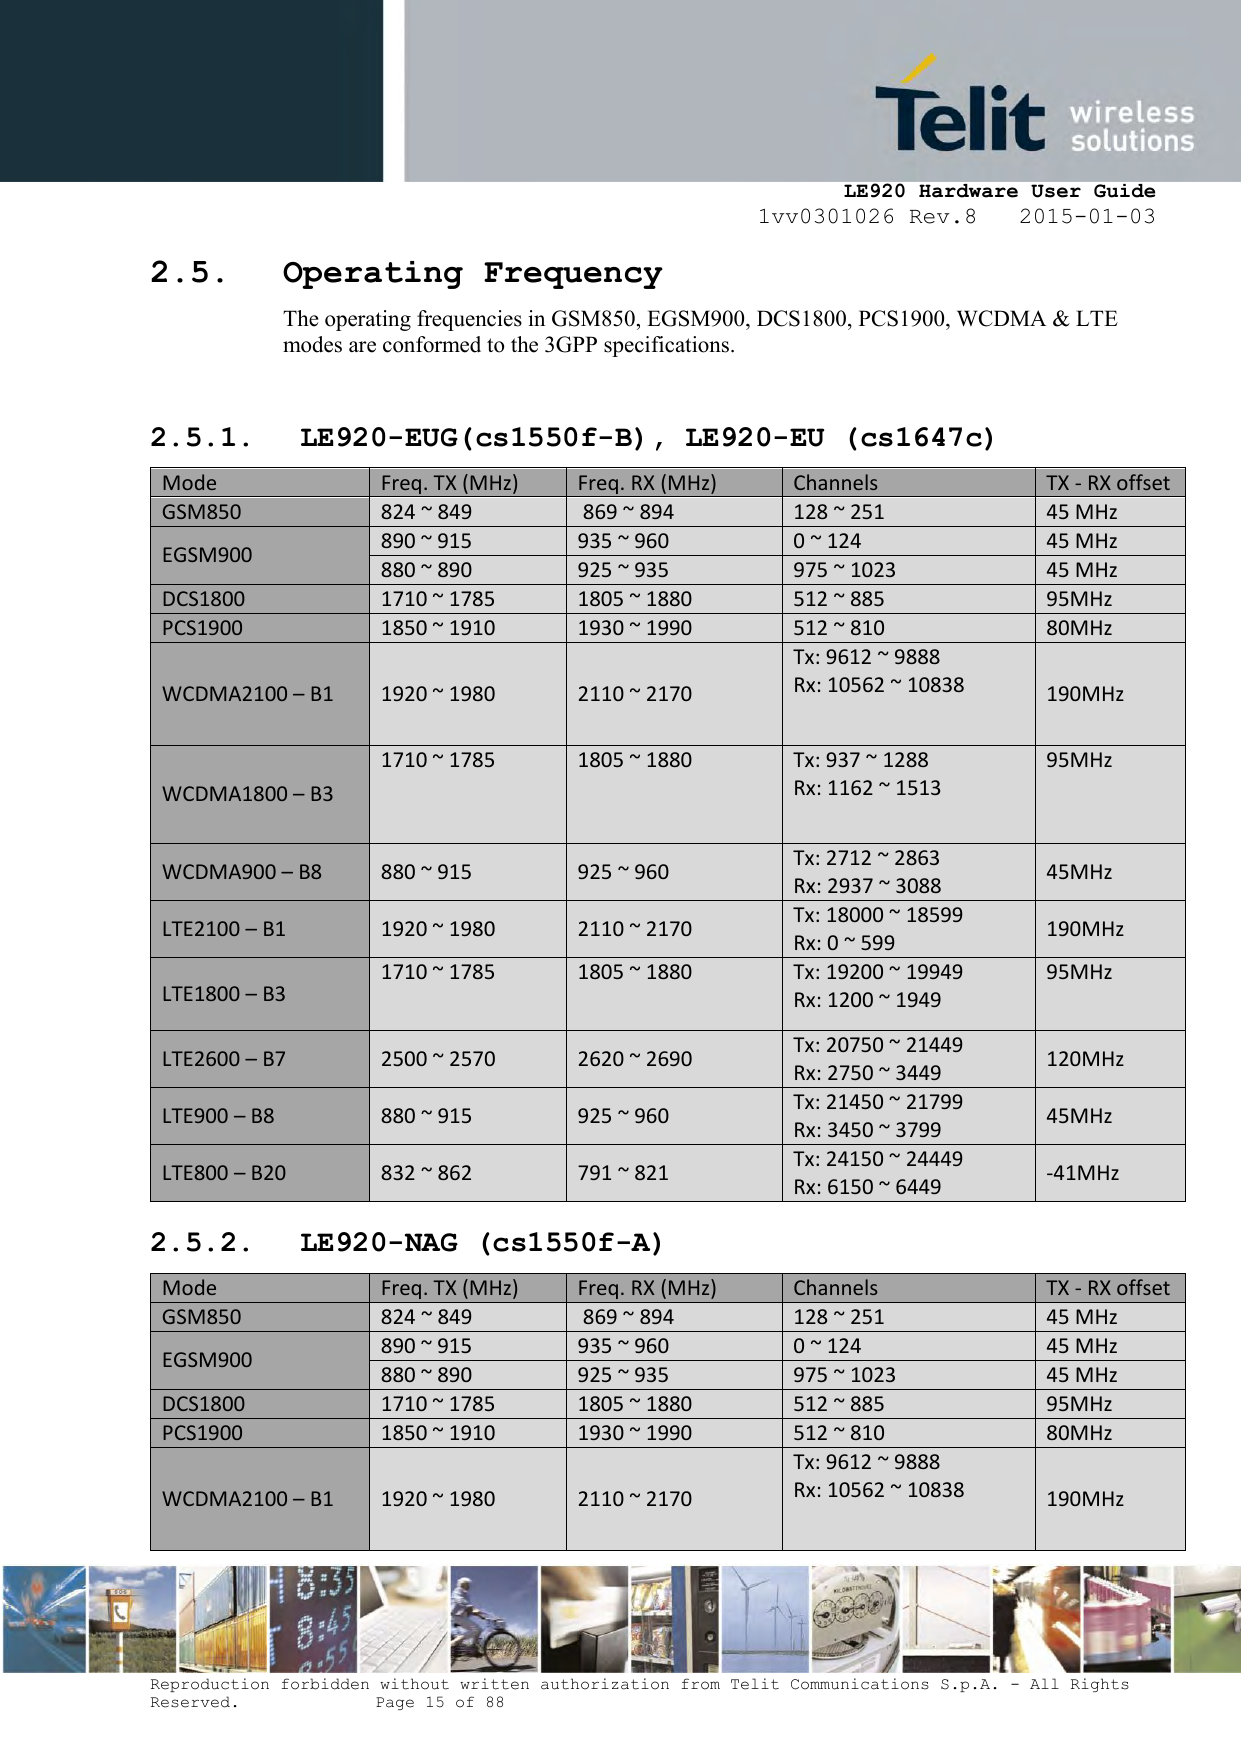     LE920 Hardware User Guide 1vv0301026 Rev.8   2015-01-03 Reproduction forbidden without written authorization from Telit Communications S.p.A. - All Rights Reserved.    Page 15 of 88  2.5. Operating Frequency The operating frequencies in GSM850, EGSM900, DCS1800, PCS1900, WCDMA &amp; LTE modes are conformed to the 3GPP specifications.  2.5.1. LE920-EUG(cs1550f-B), LE920-EU (cs1647c)  Mode Freq. TX (MHz) Freq. RX (MHz) Channels TX - RX offset GSM850 824 ~ 849  869 ~ 894 128 ~ 251 45 MHz EGSM900 890 ~ 915 935 ~ 960 0 ~ 124 45 MHz 880 ~ 890 925 ~ 935 975 ~ 1023 45 MHz DCS1800 1710 ~ 1785 1805 ~ 1880 512 ~ 885 95MHz PCS1900 1850 ~ 1910 1930 ~ 1990 512 ~ 810 80MHz WCDMA2100 – B1 1920 ~ 1980 2110 ~ 2170 Tx: 9612 ~ 9888 Rx: 10562 ~ 10838 190MHz WCDMA1800 – B3 1710 ~ 1785 1805 ~ 1880 Tx: 937 ~ 1288 Rx: 1162 ~ 1513 95MHz WCDMA900 – B8 880 ~ 915 925 ~ 960 Tx: 2712 ~ 2863 Rx: 2937 ~ 3088 45MHz LTE2100 – B1 1920 ~ 1980 2110 ~ 2170 Tx: 18000 ~ 18599 Rx: 0 ~ 599  190MHz LTE1800 – B3 1710 ~ 1785 1805 ~ 1880 Tx: 19200 ~ 19949 Rx: 1200 ~ 1949 95MHz LTE2600 – B7 2500 ~ 2570 2620 ~ 2690 Tx: 20750 ~ 21449 Rx: 2750 ~ 3449 120MHz LTE900 – B8 880 ~ 915 925 ~ 960 Tx: 21450 ~ 21799 Rx: 3450 ~ 3799 45MHz LTE800 – B20 832 ~ 862 791 ~ 821 Tx: 24150 ~ 24449 Rx: 6150 ~ 6449 -41MHz 2.5.2. LE920-NAG (cs1550f-A) Mode Freq. TX (MHz) Freq. RX (MHz) Channels TX - RX offset GSM850 824 ~ 849  869 ~ 894 128 ~ 251 45 MHz EGSM900 890 ~ 915 935 ~ 960 0 ~ 124 45 MHz 880 ~ 890 925 ~ 935 975 ~ 1023 45 MHz DCS1800 1710 ~ 1785 1805 ~ 1880 512 ~ 885 95MHz PCS1900 1850 ~ 1910 1930 ~ 1990 512 ~ 810 80MHz WCDMA2100 – B1 1920 ~ 1980 2110 ~ 2170 Tx: 9612 ~ 9888 Rx: 10562 ~ 10838 190MHz 